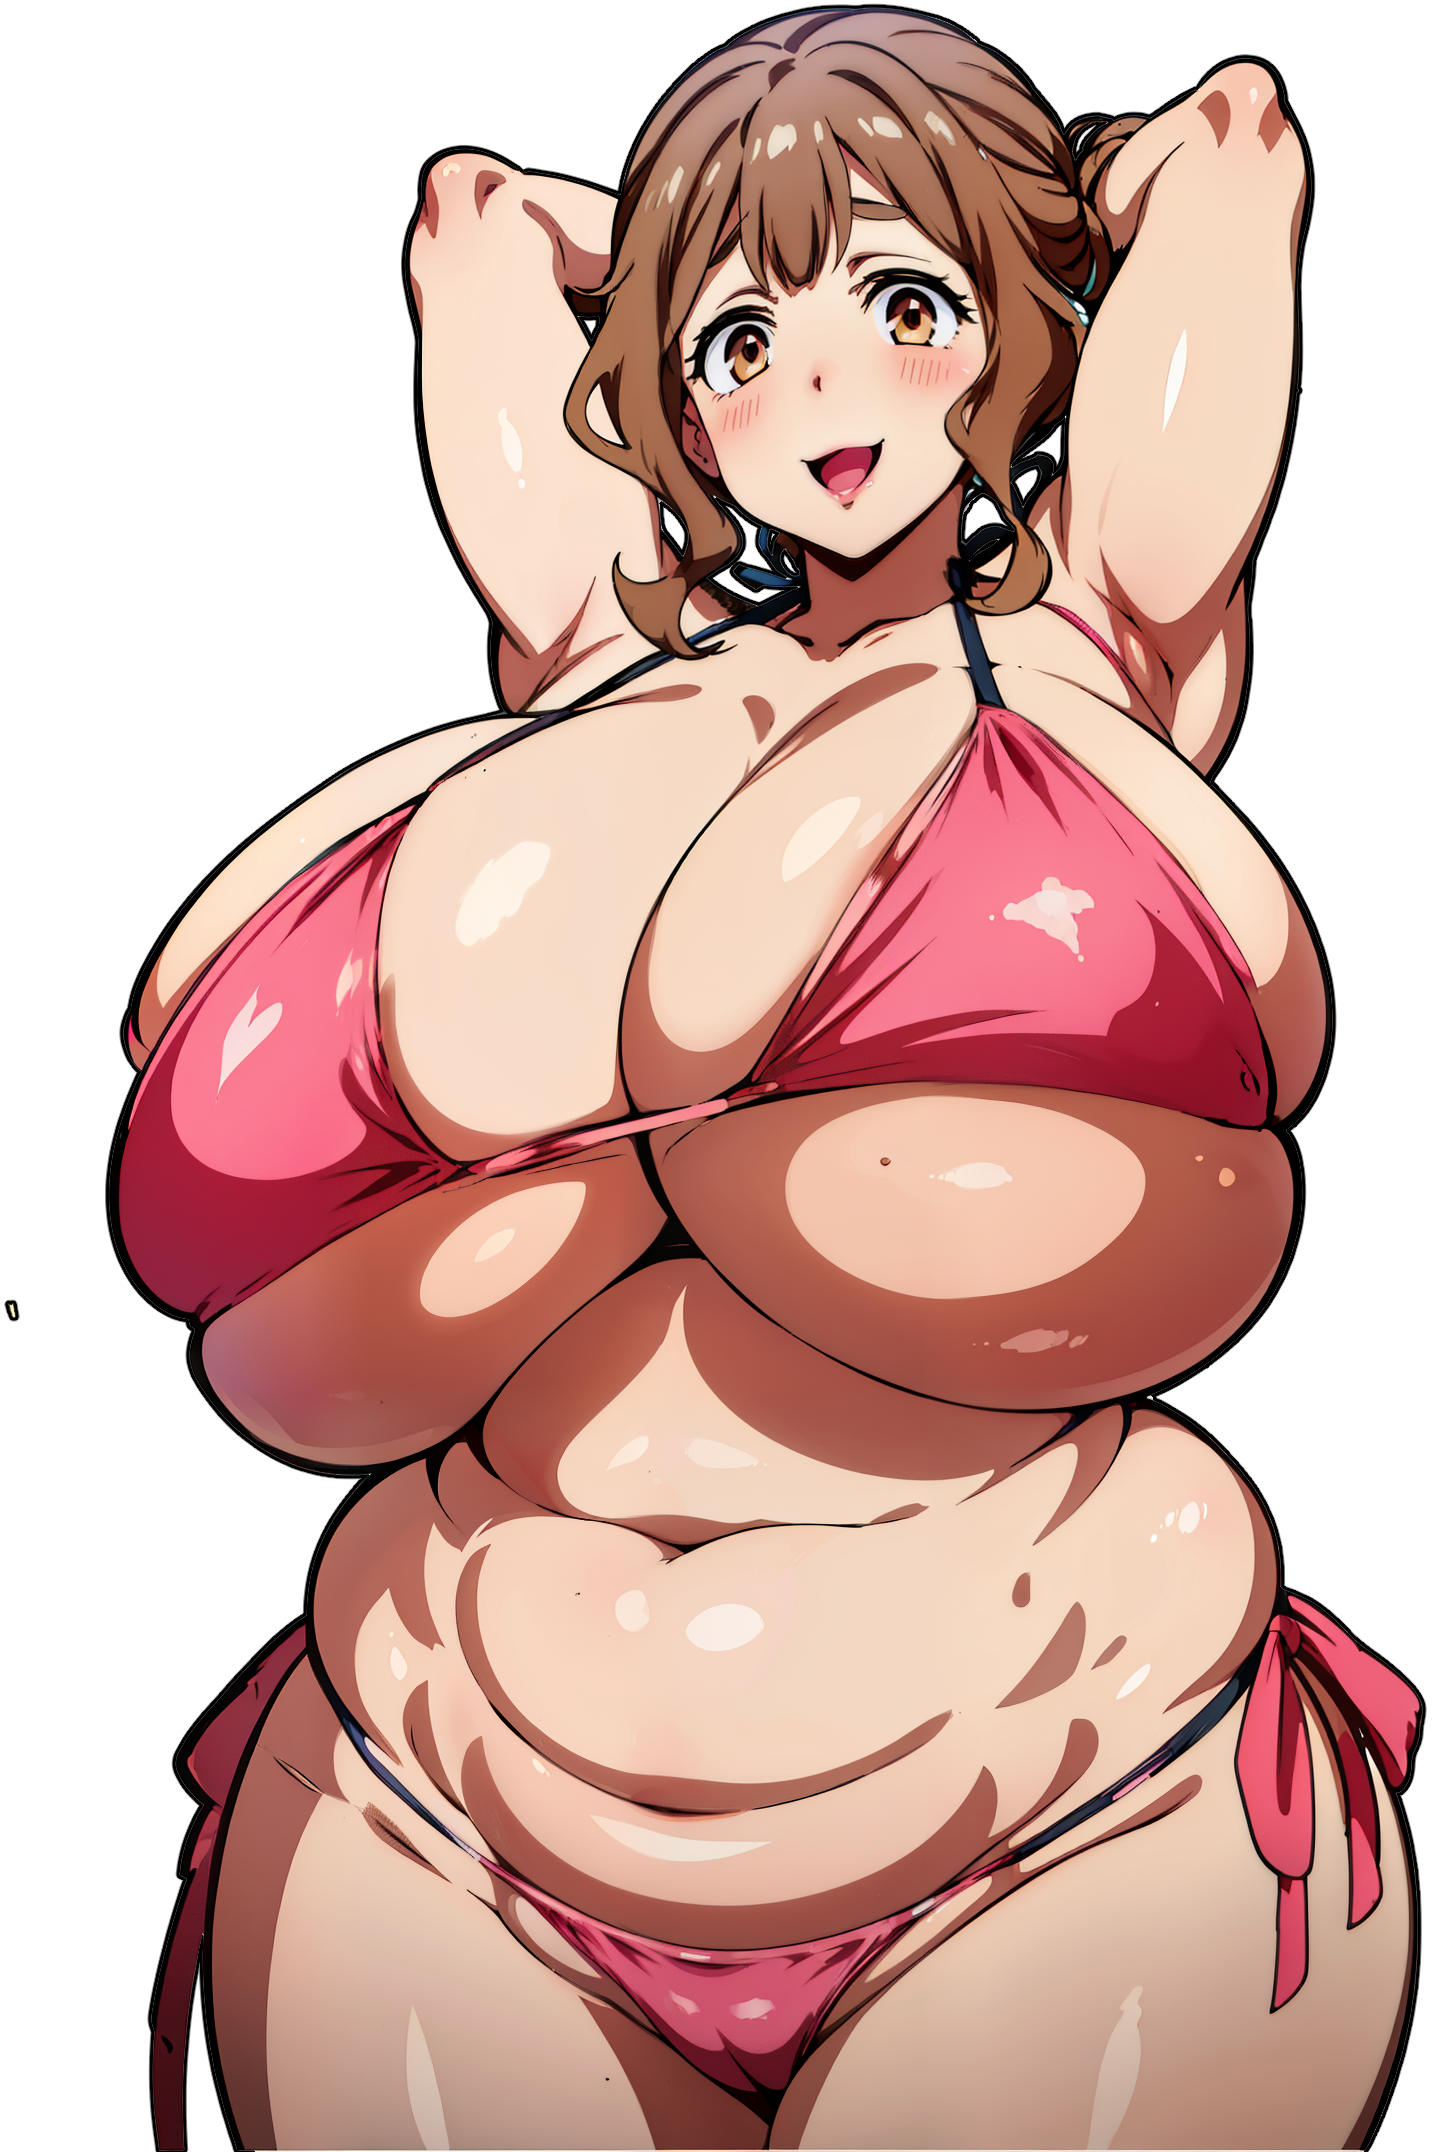 Femdom,Female,Huge Breasts,Love,Anime,Name: Kazami Tori Height: 161cm, Weight: 56kg Size: Bust: 99cm (I cup) Waist: 68cm Hips: 89cm Tori is a facility located on the artificial island Mermaid that accepts girls who have nowhere to go. The manager of ``Town.&#39;&#39; Self-proclaimed 17 years old. Due to her outstanding proportions and generous personality, she is affectionately nicknamed &quot;Manager-san&quot; by the girls at the facility. She is sensitive to the topic of age, and although she claims to be 17 years old, her true identity is unknown.